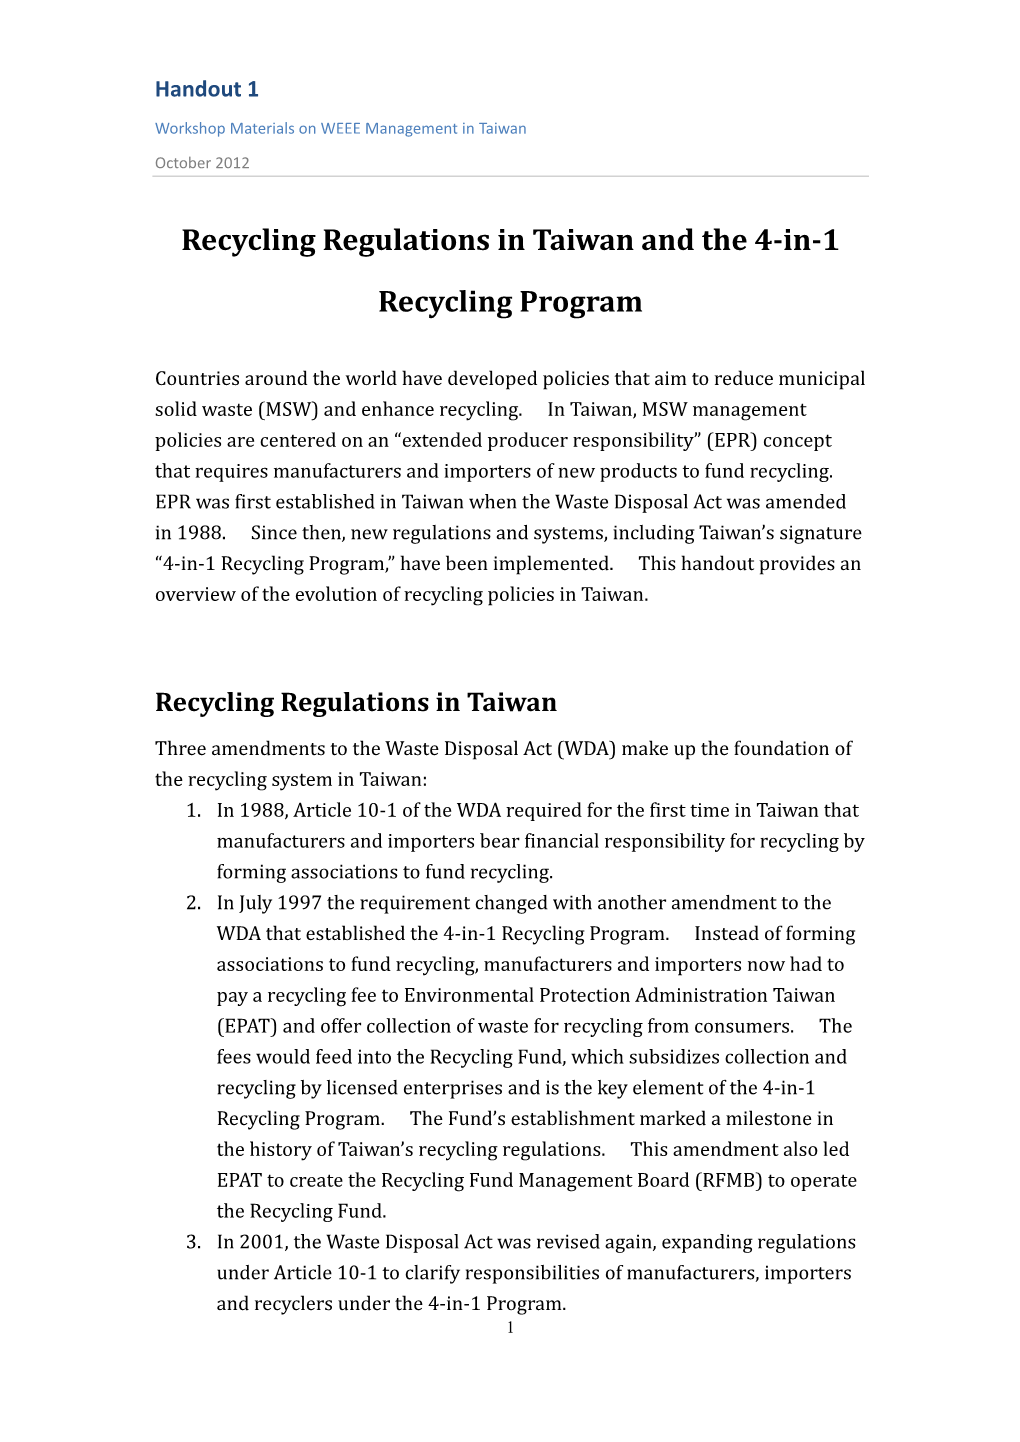 Recycling Regulations in Taiwan and the 4-In-1 Recycling Program